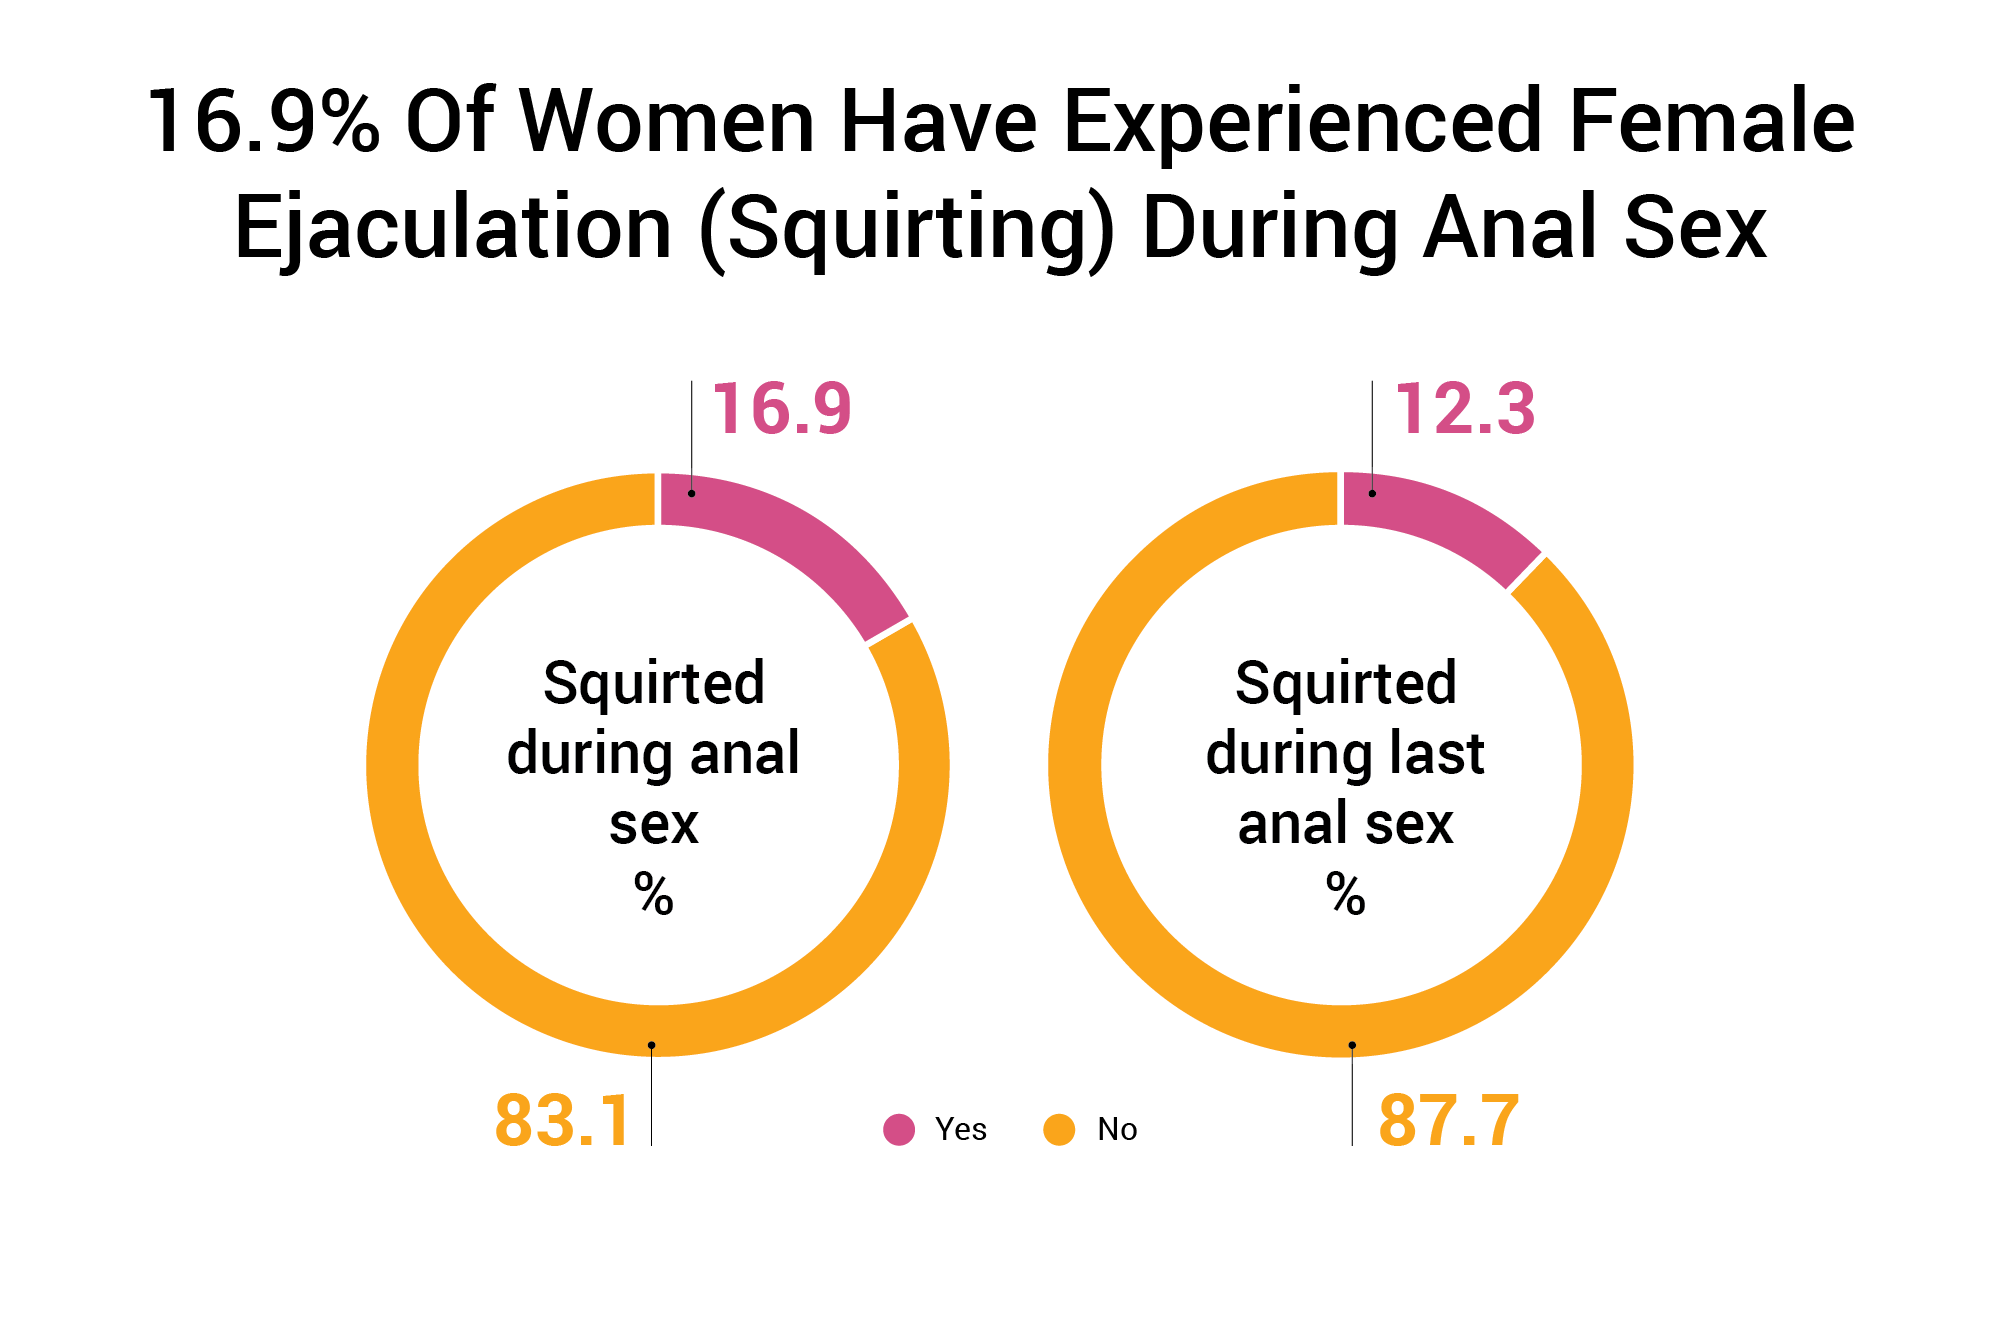 16.9 percent of women have squirted during anal sex